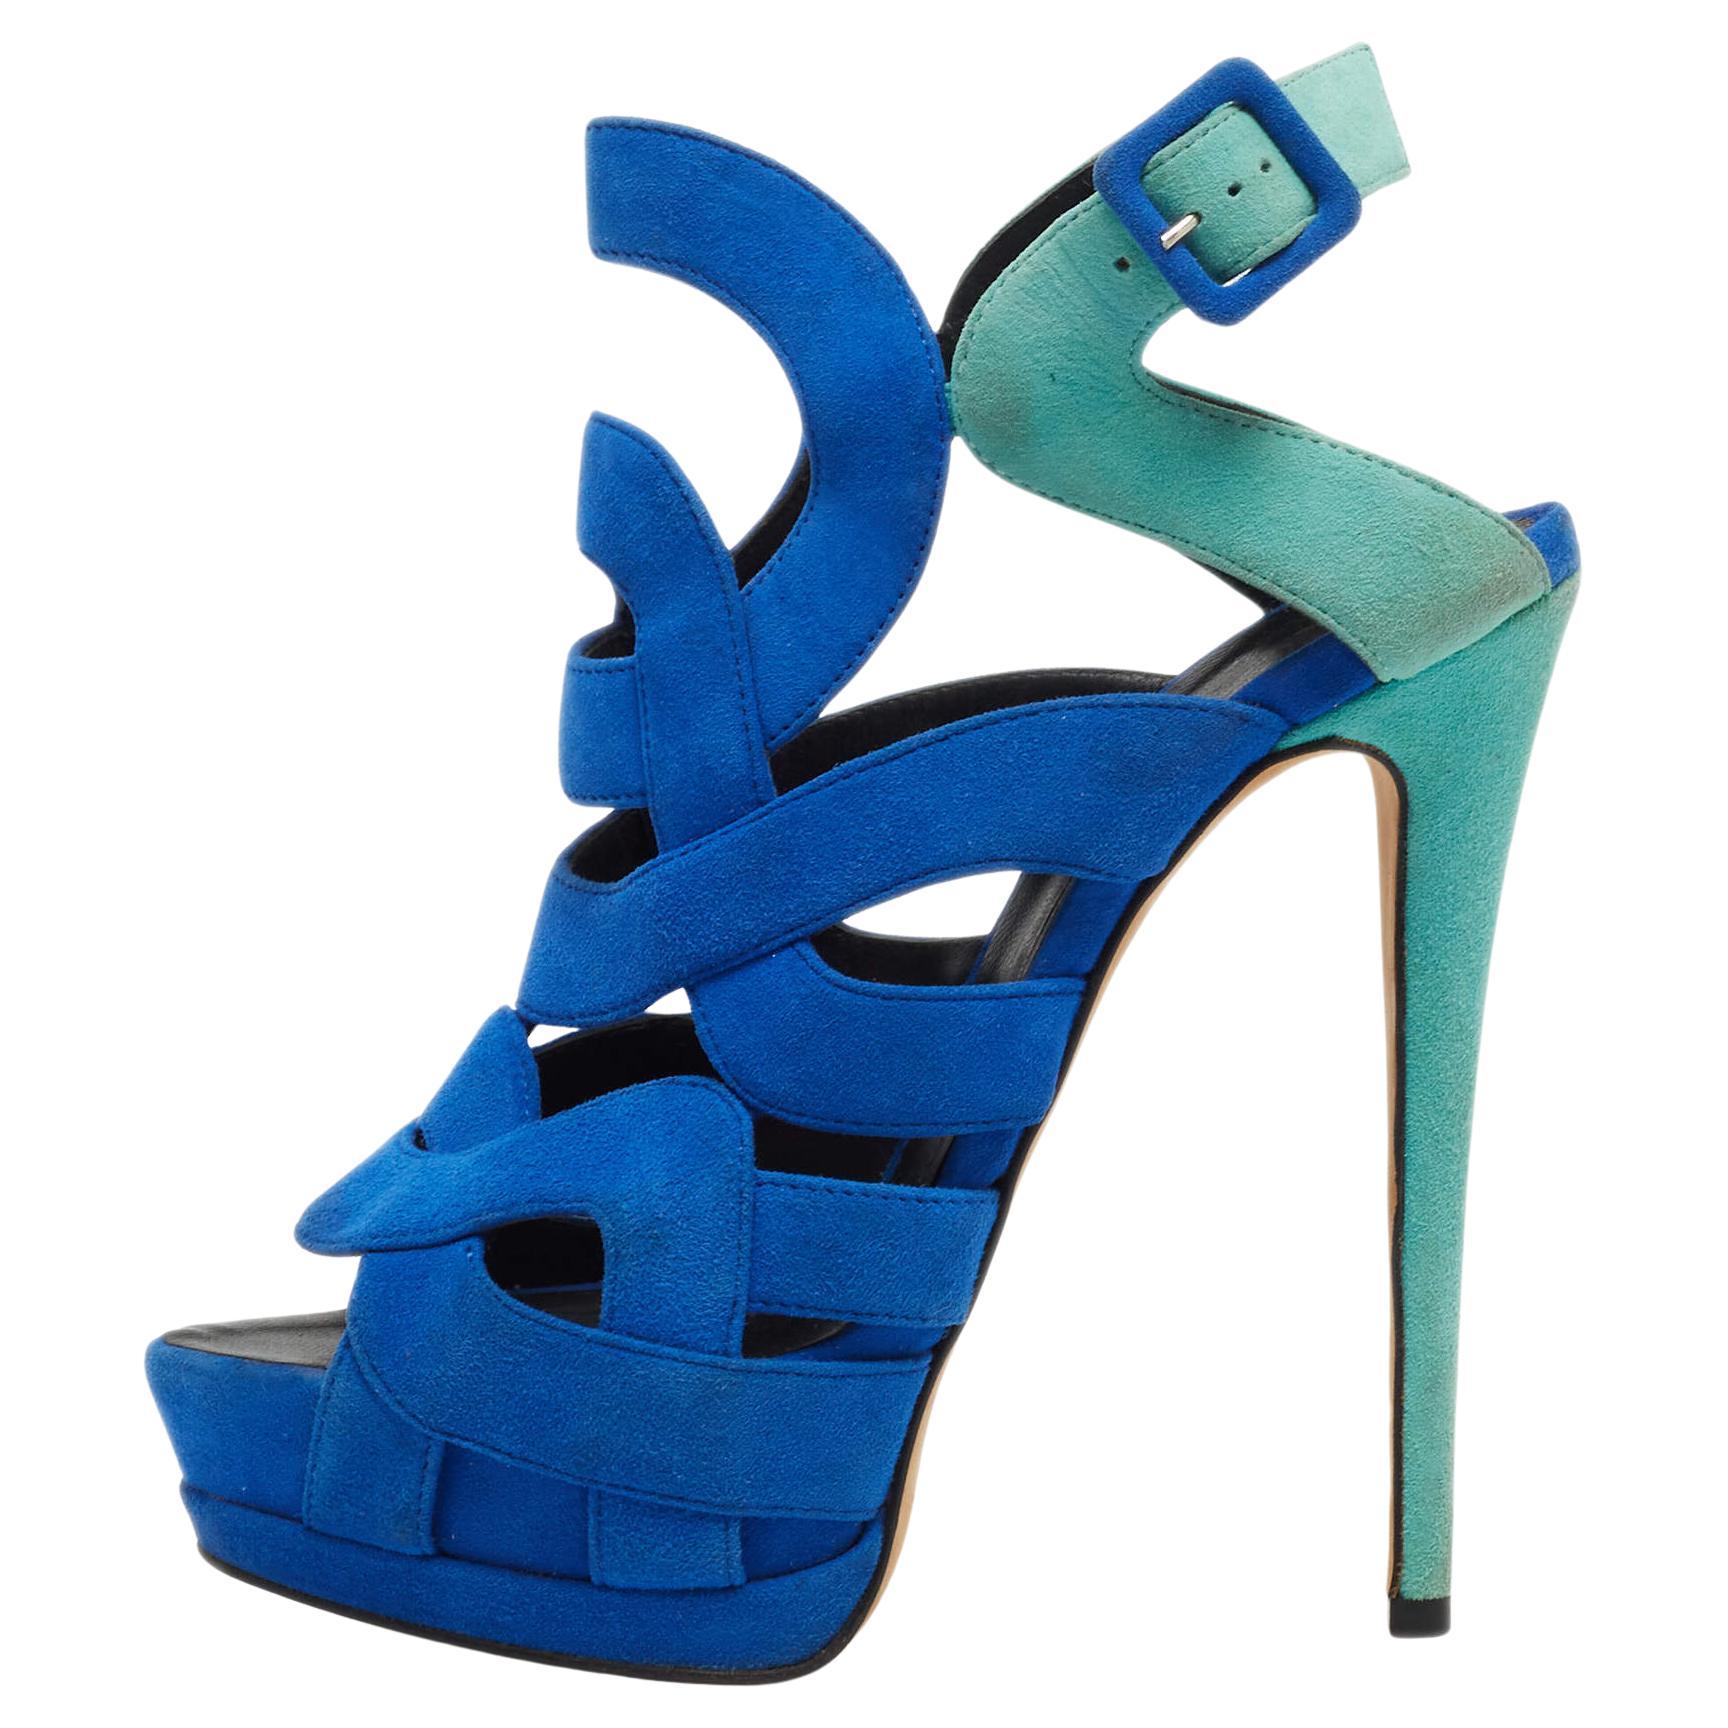 Giuseppe Zanotti Two Tone Suede Cutout Caged Slingback Platform Sandals Size 38. For Sale